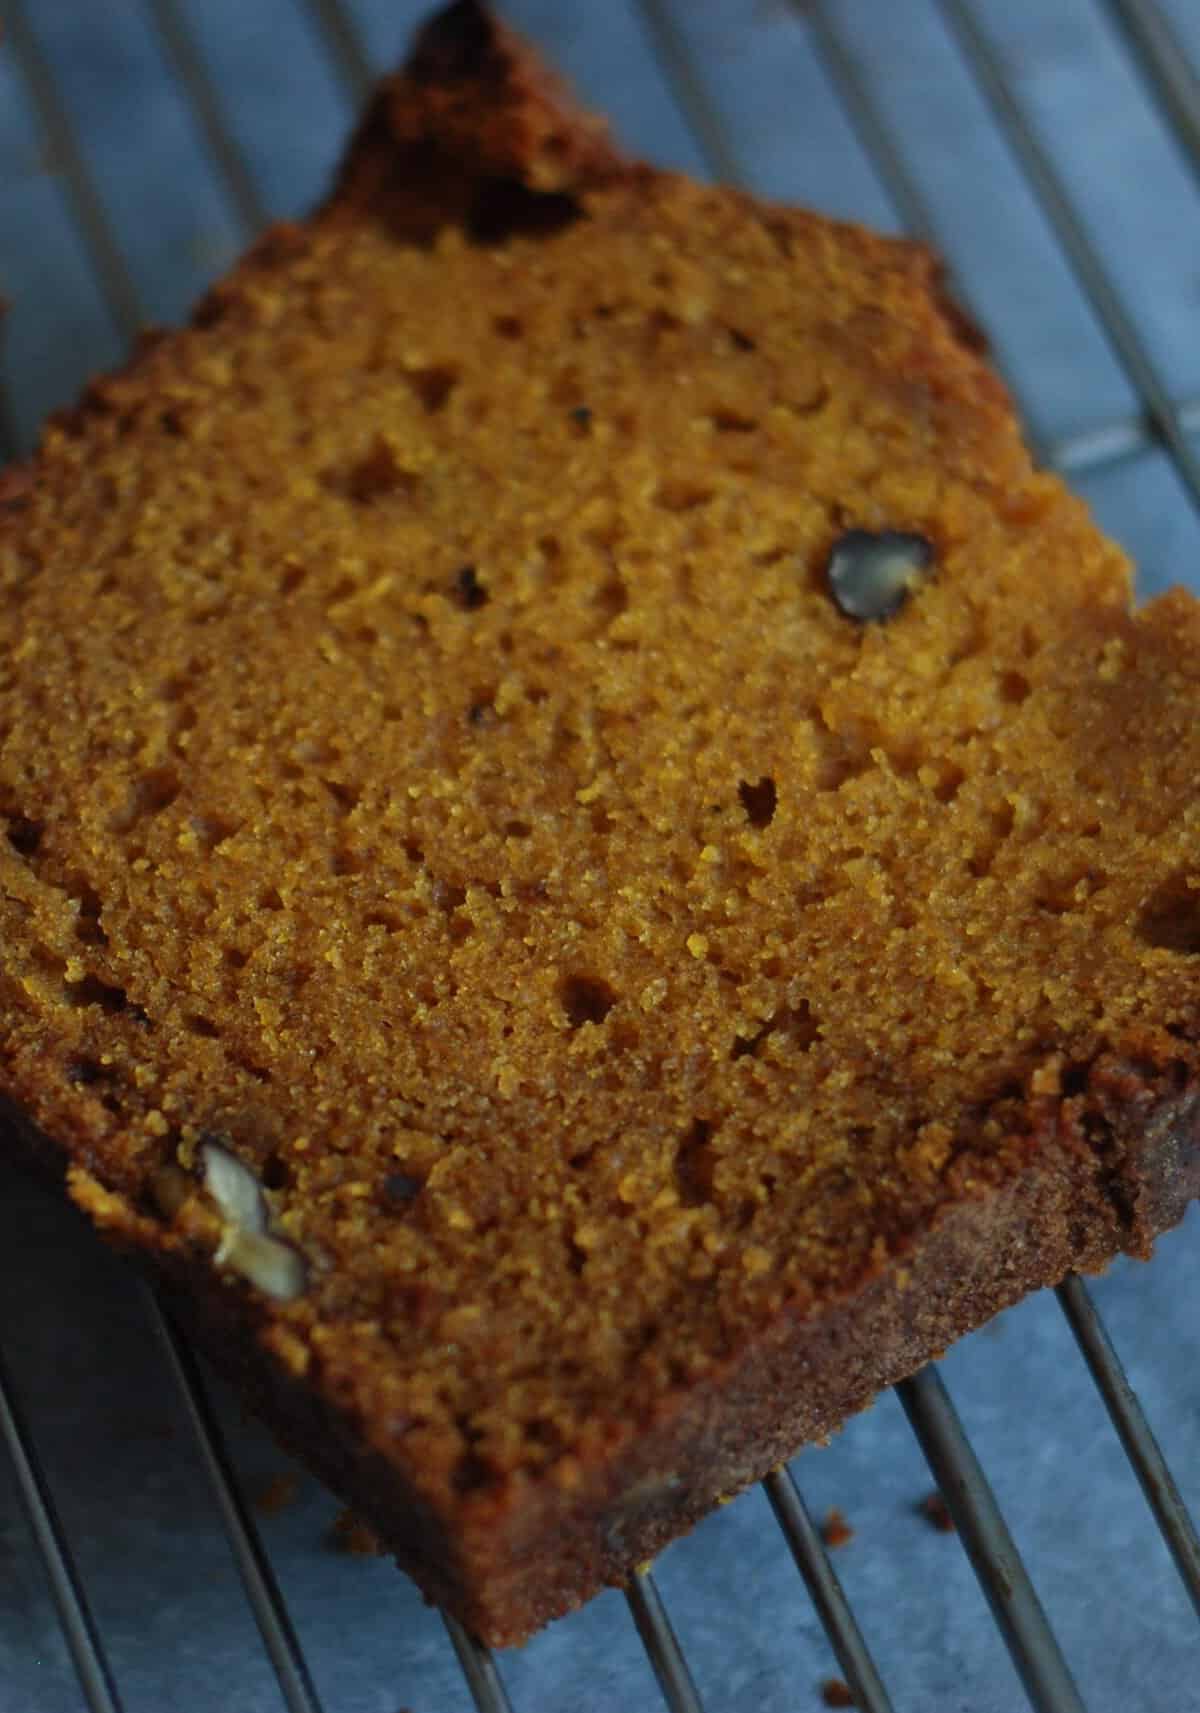  The aroma of pumpkin, cinnamon, and nutmeg wafting from the oven is simply irresistible.